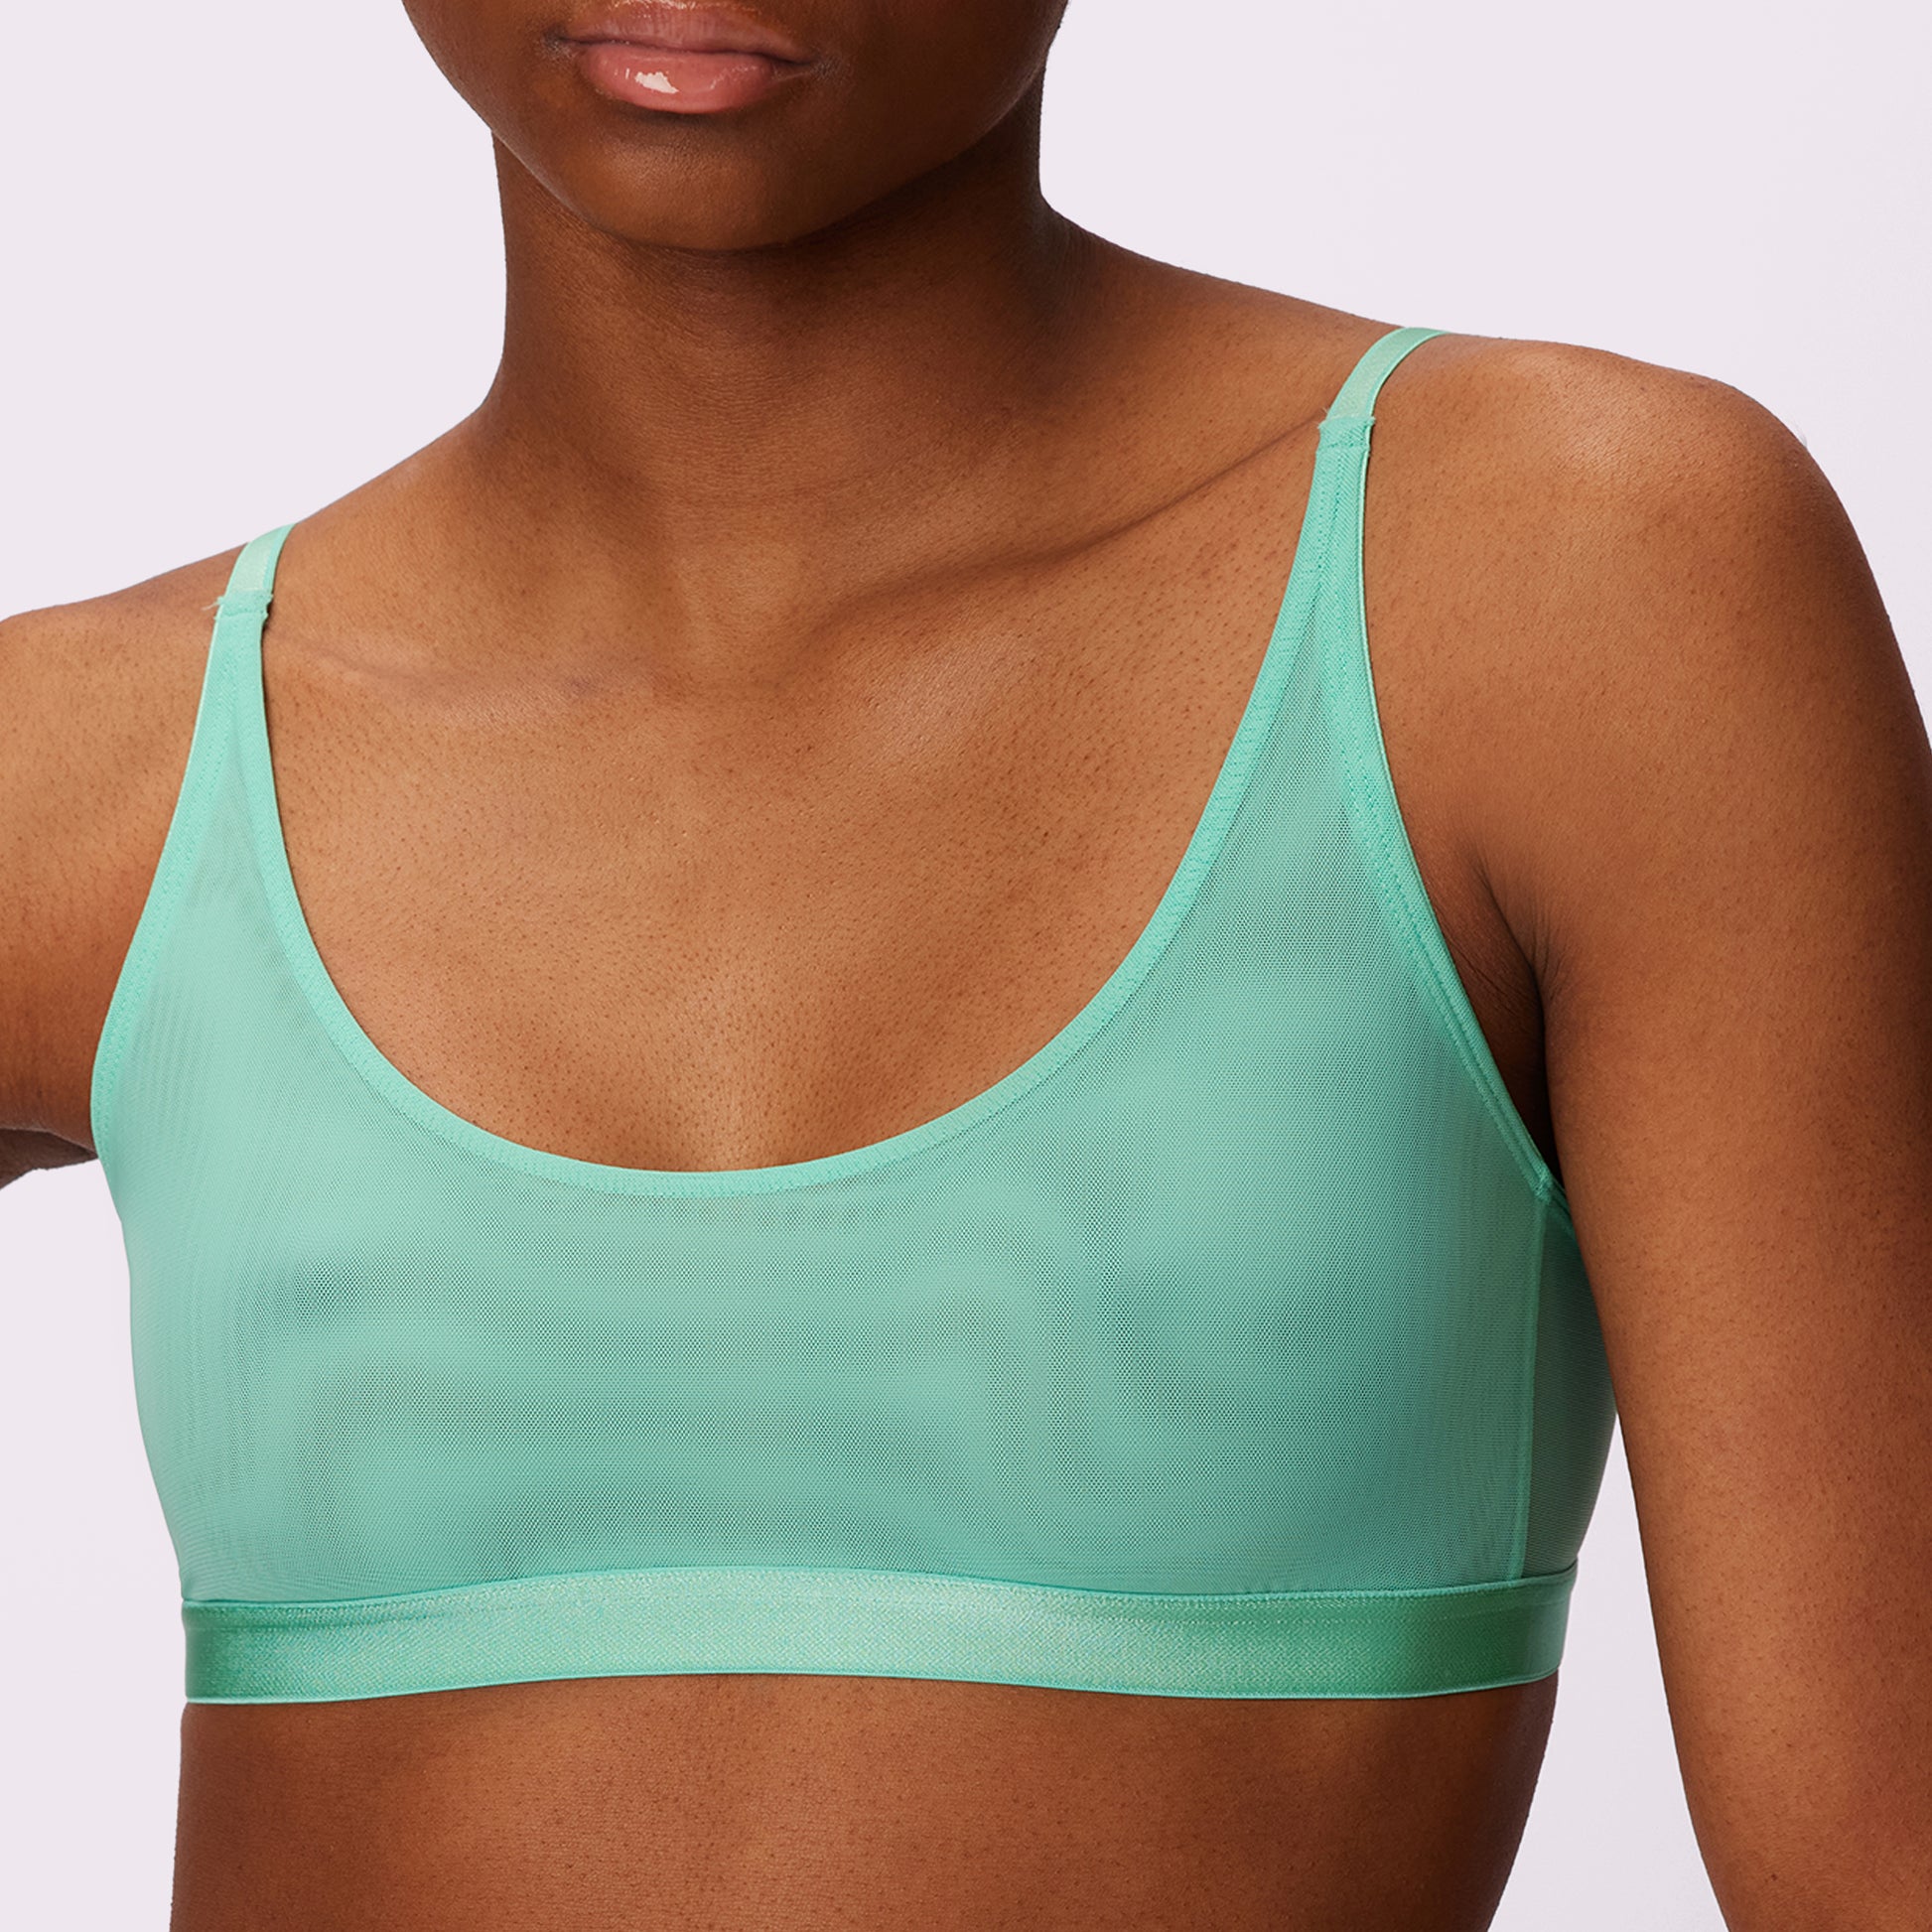 Lemongrass - Wireless Mesh Bra Top with Pads in 5 Colors